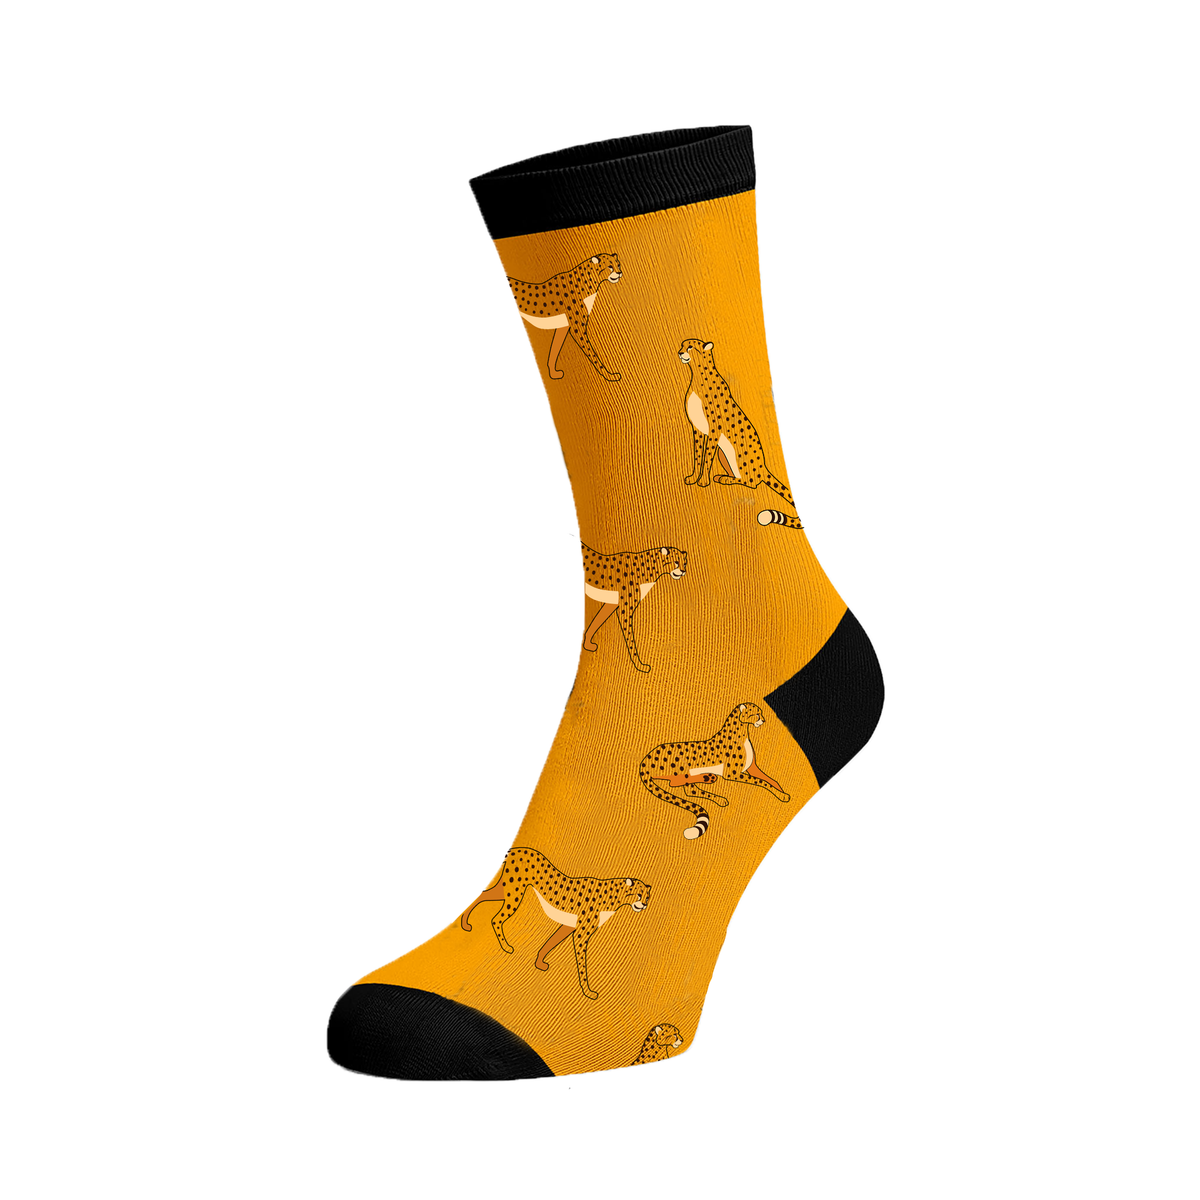 Hansie en Grietjie vulnerable socks featuring a cheetah design, supporting conservation efforts in Africa.